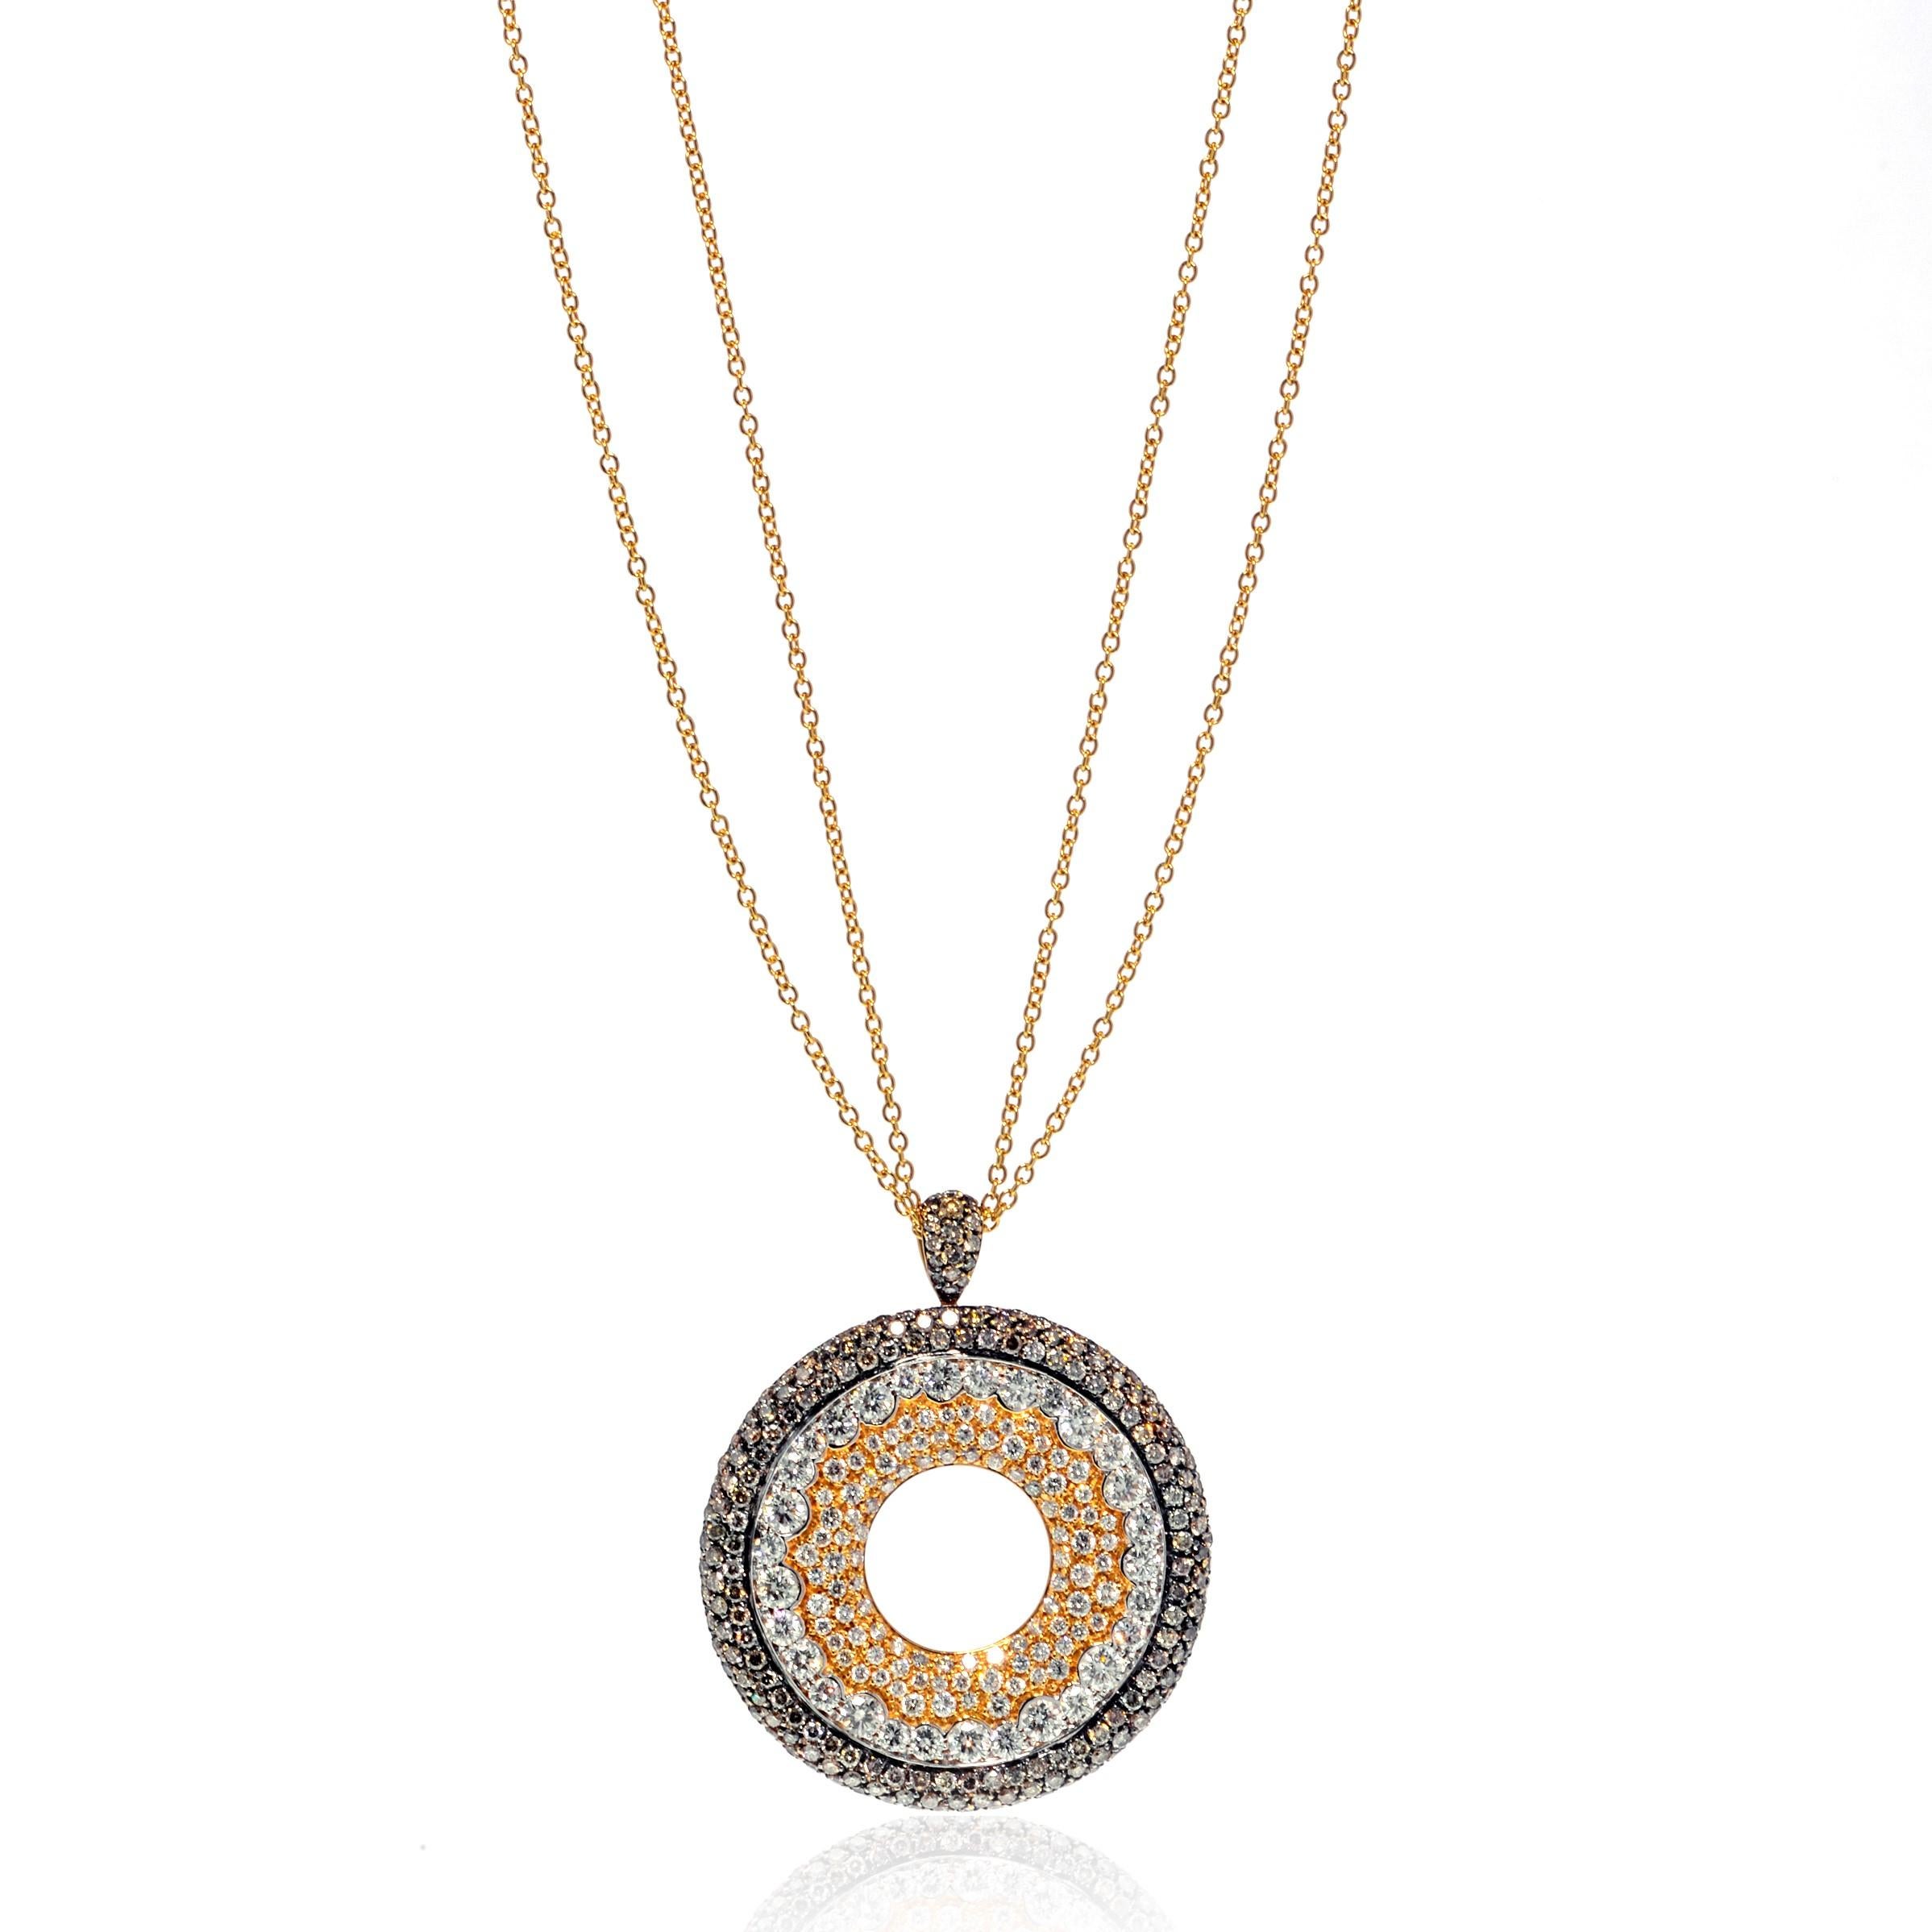 This magnificent diamond pendant with lavish white and brown diamonds create a look that will make you feel truly luxurious and elegant. Presented in fine 18k yellow gold with a black rhodium. Showcasing a set of 3.91cttw of white round cut diamonds